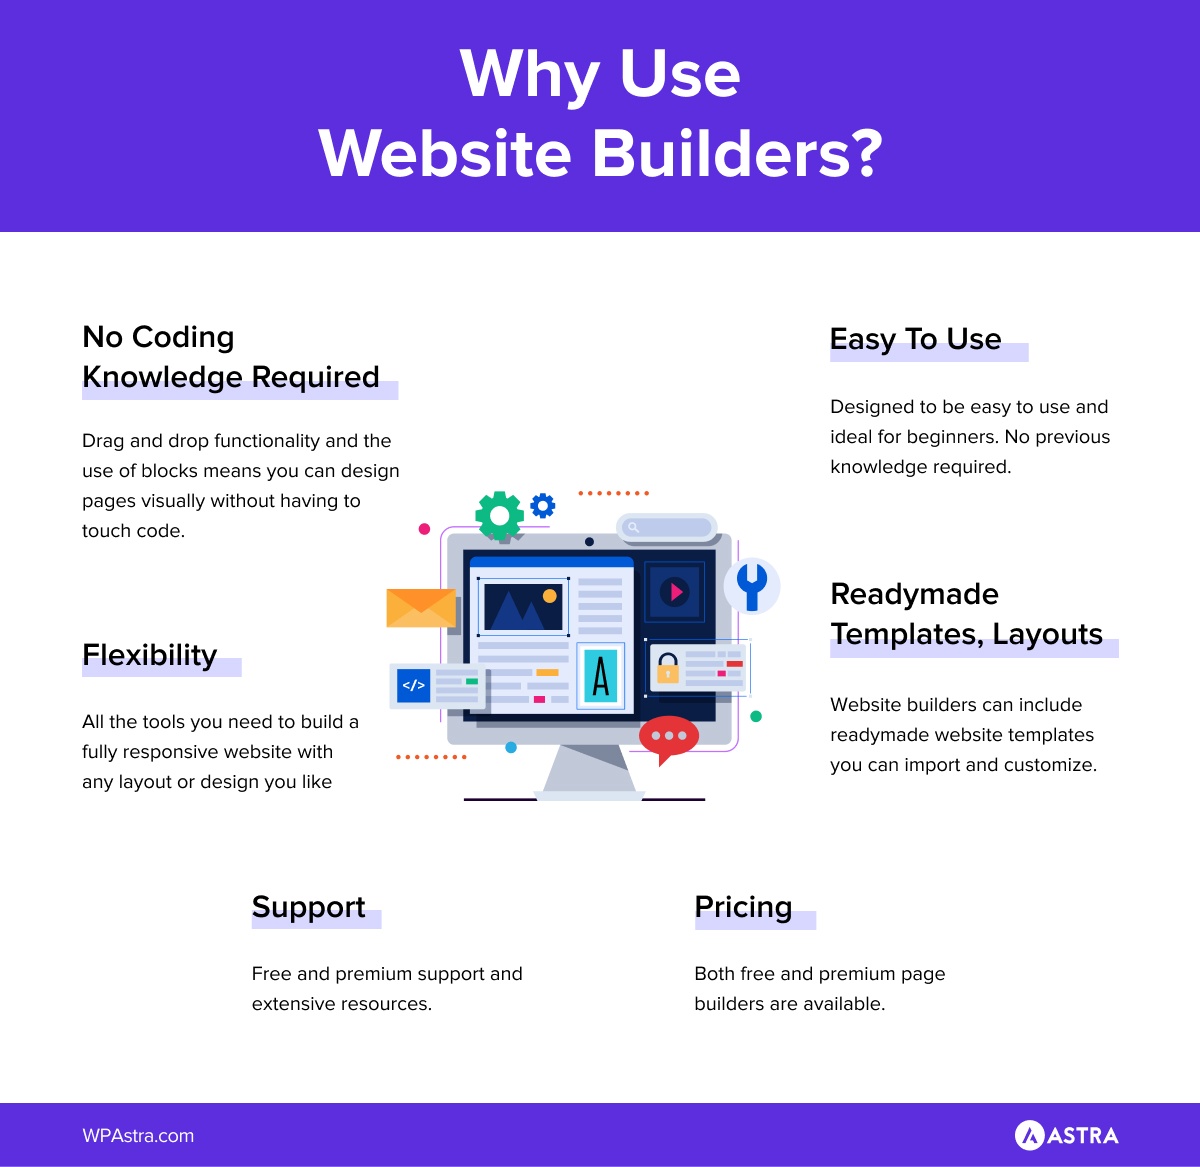 Why use website builders